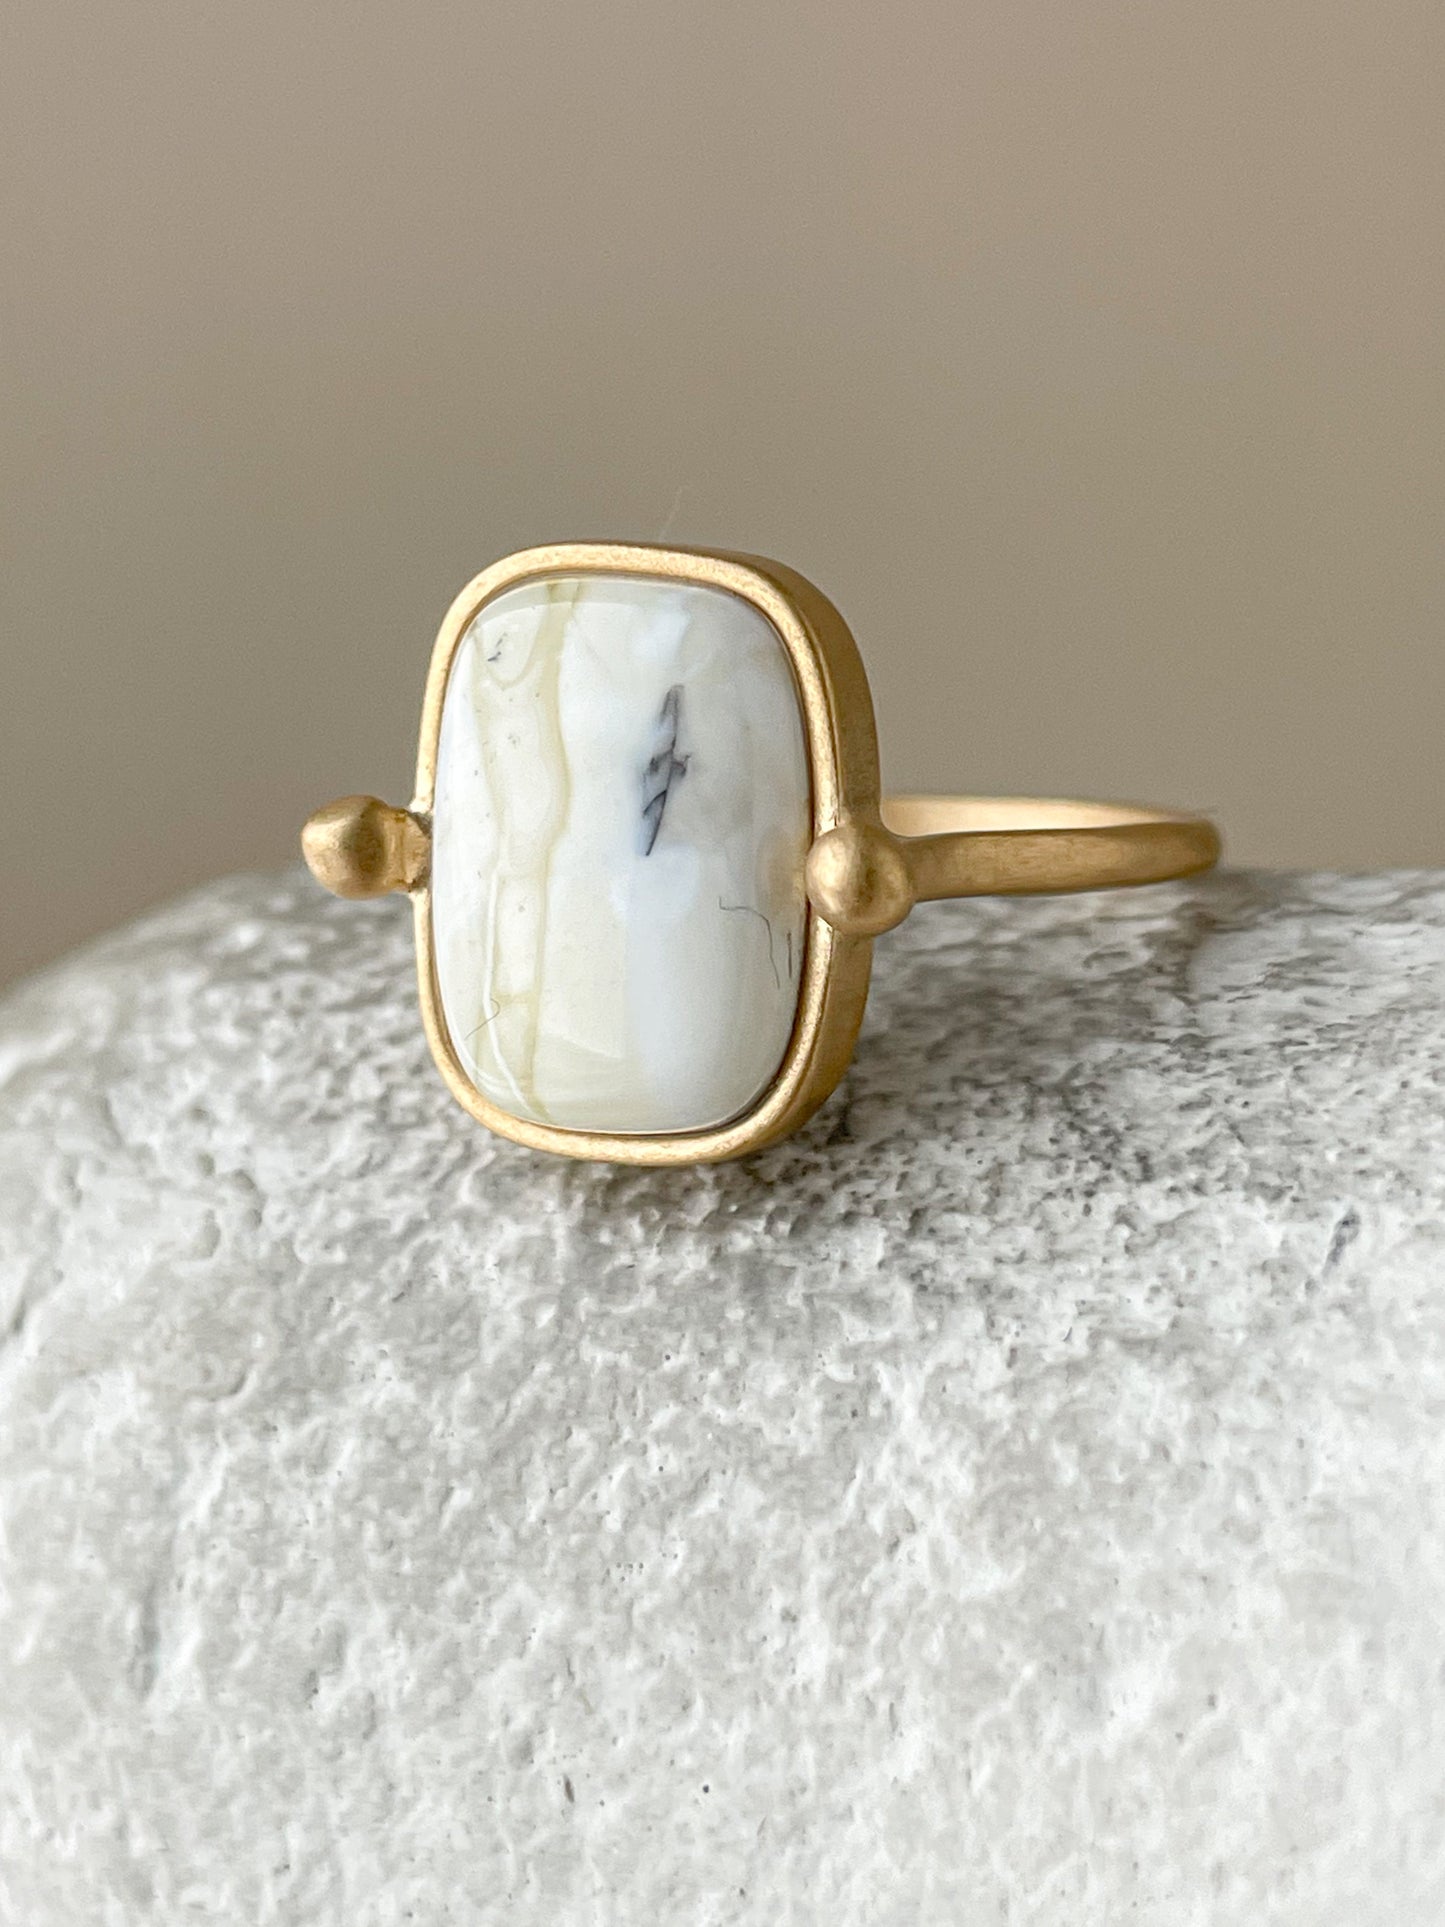 White amber ring - Gold plated silver - Vintage style ring collection - Size 6 1/4